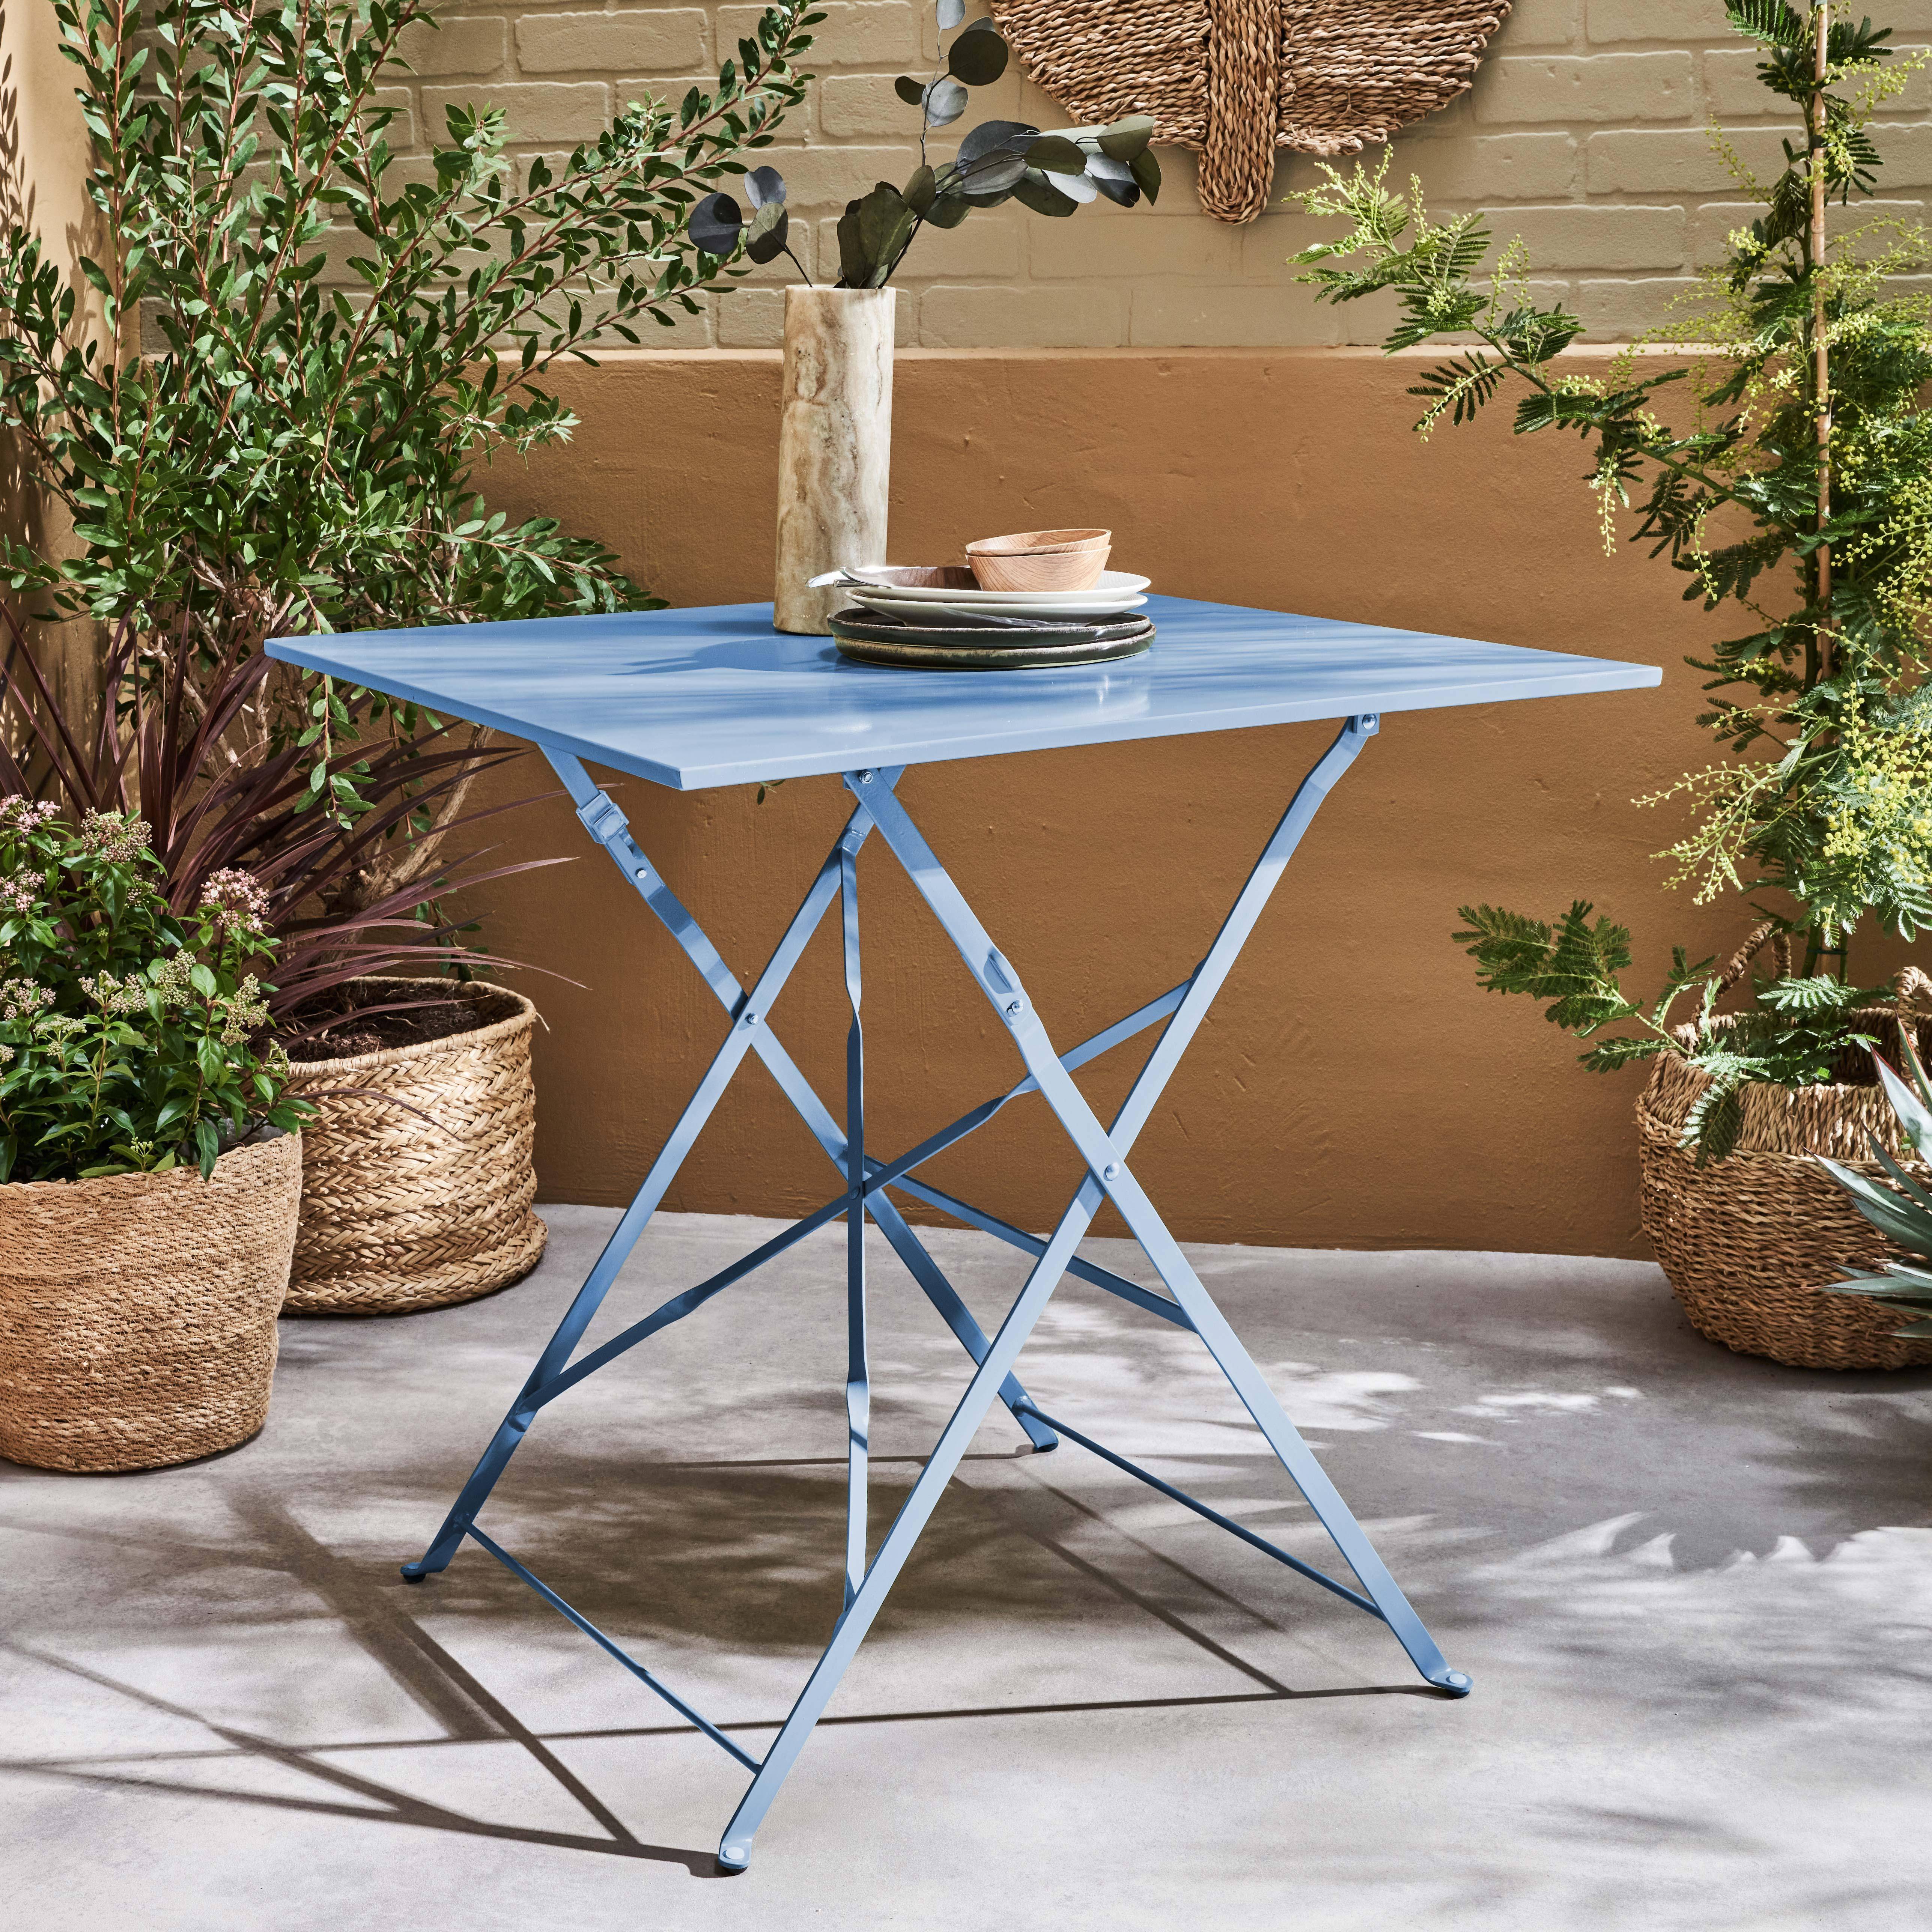 2-seater foldable thermo-lacquered steel bistro garden table, 70x70cm - Emilia - Blue grey,sweeek,Photo1